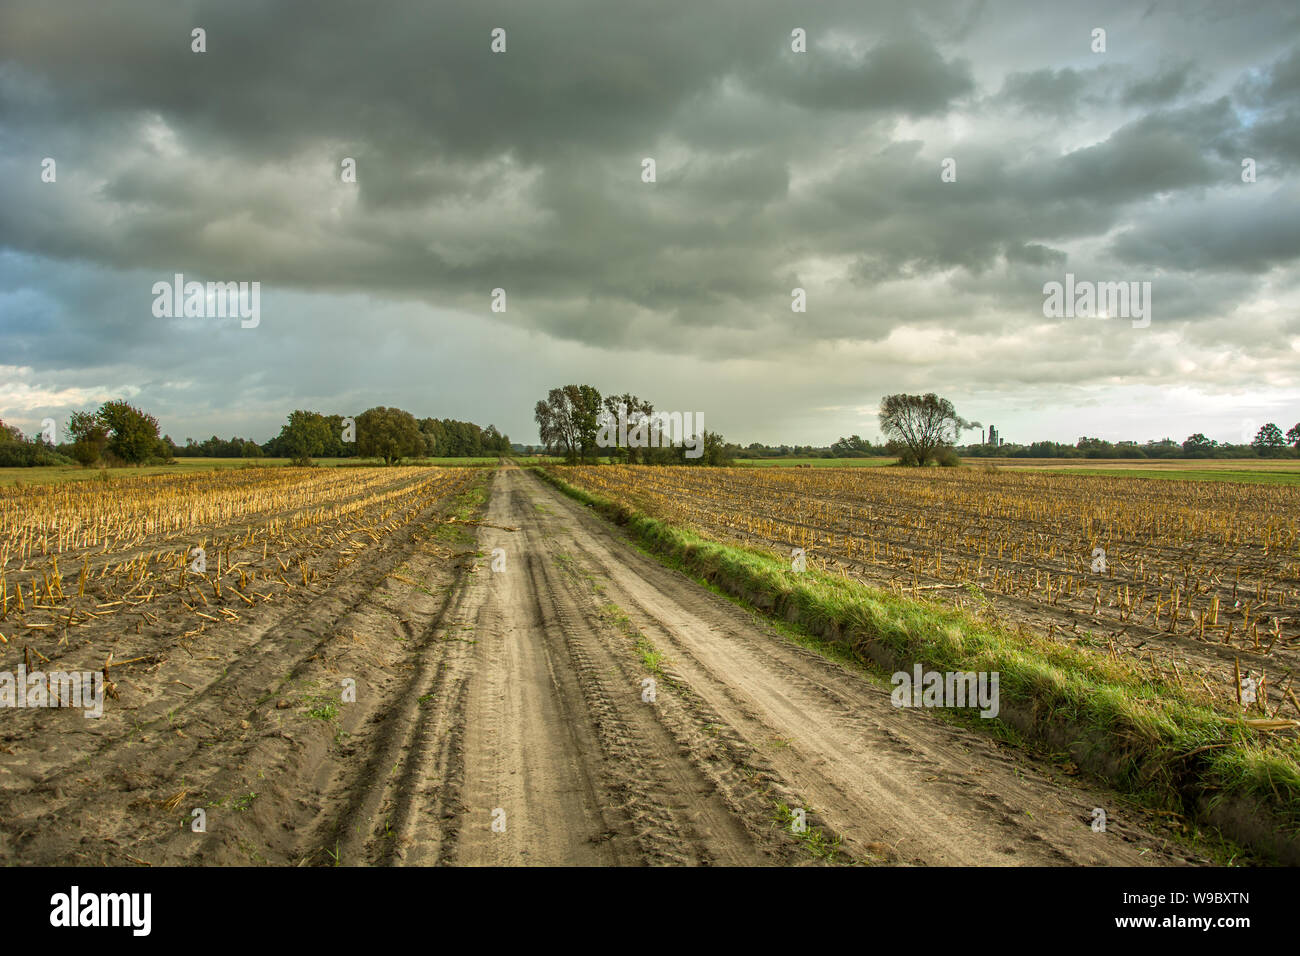 Country Road e nuvole scure nel cielo. Nowiny, Polonia Foto Stock